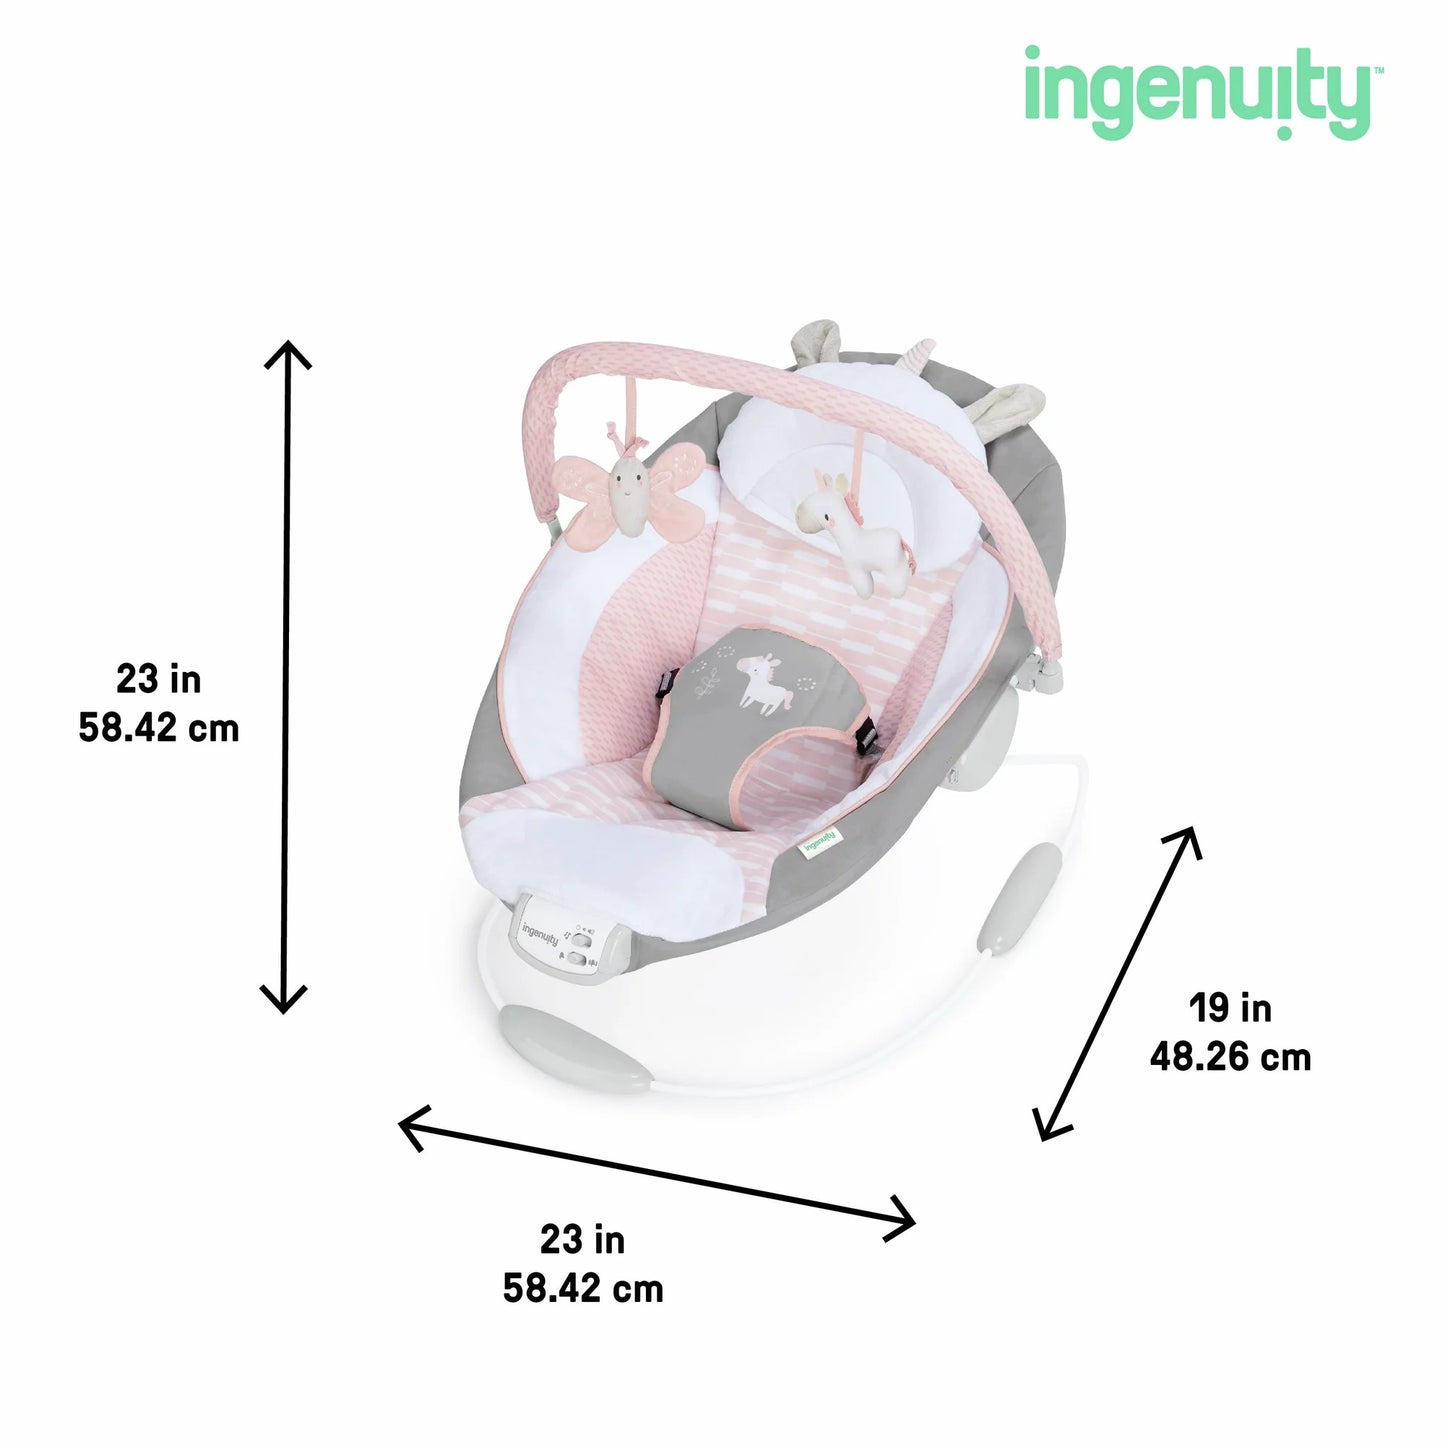 Baby Trend Stroller Car Seat Travel System Combo Pink/Gray